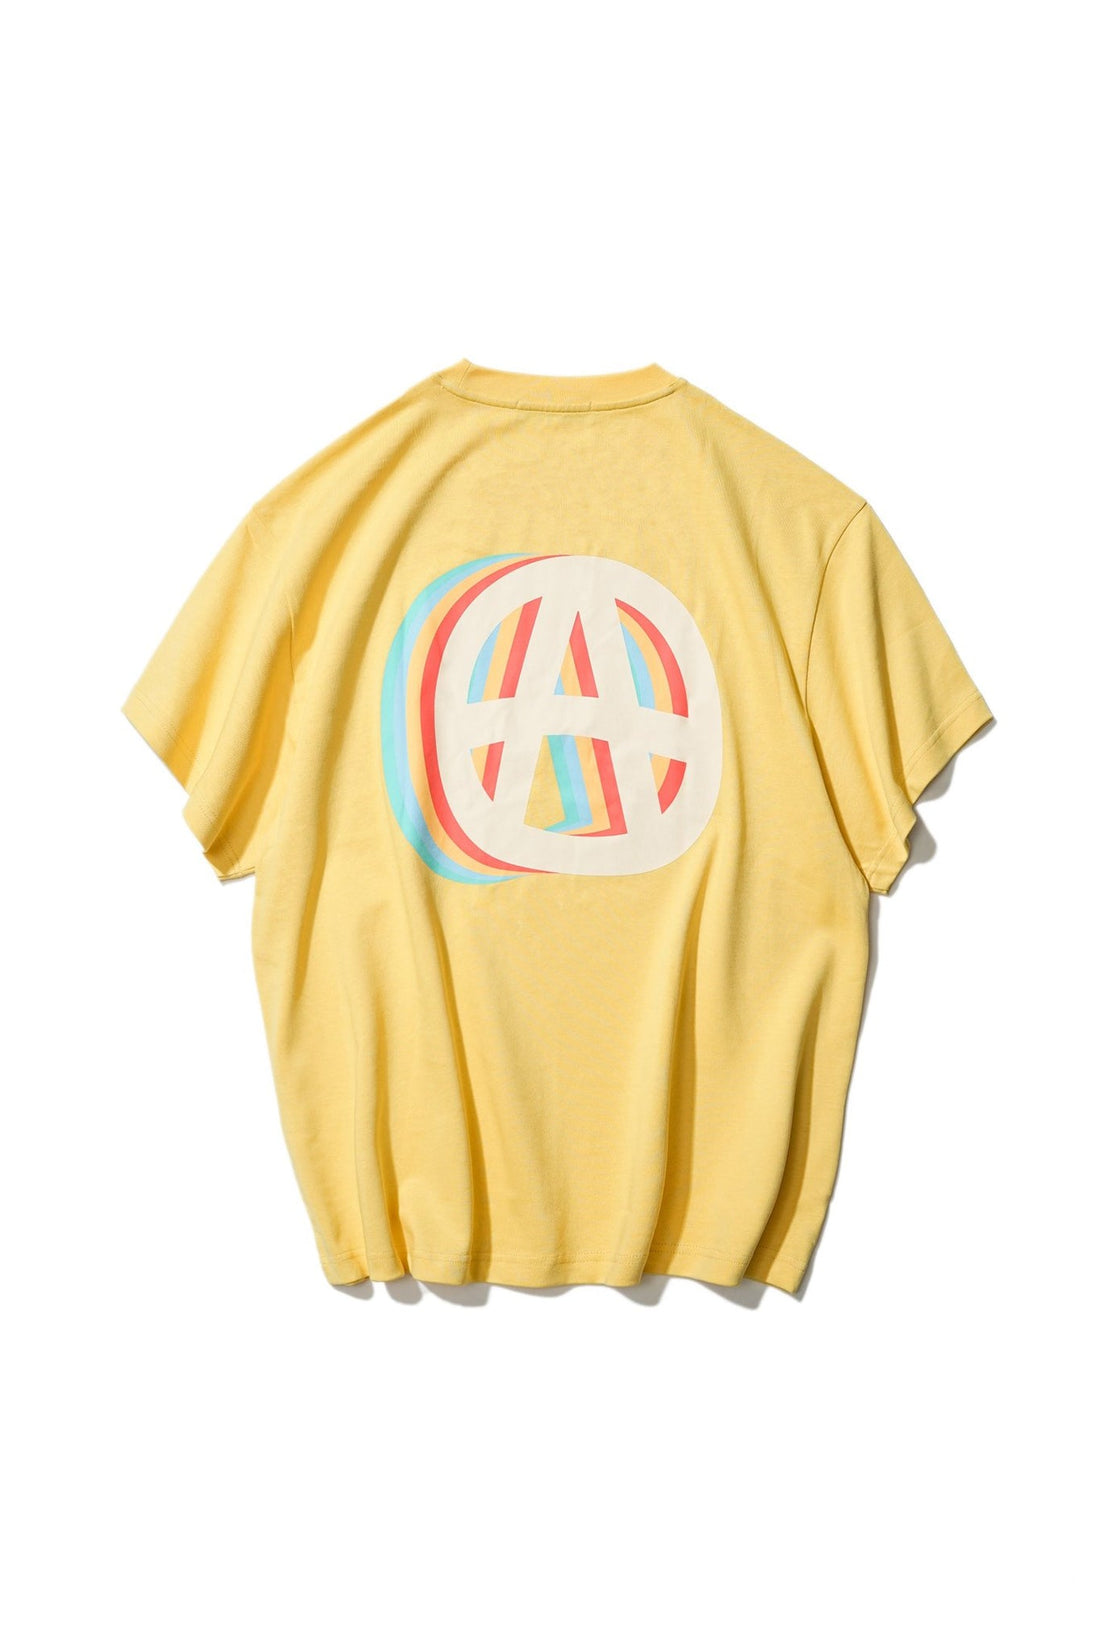 CIRCLE A T-SHIRT YELLOW Acupuncture